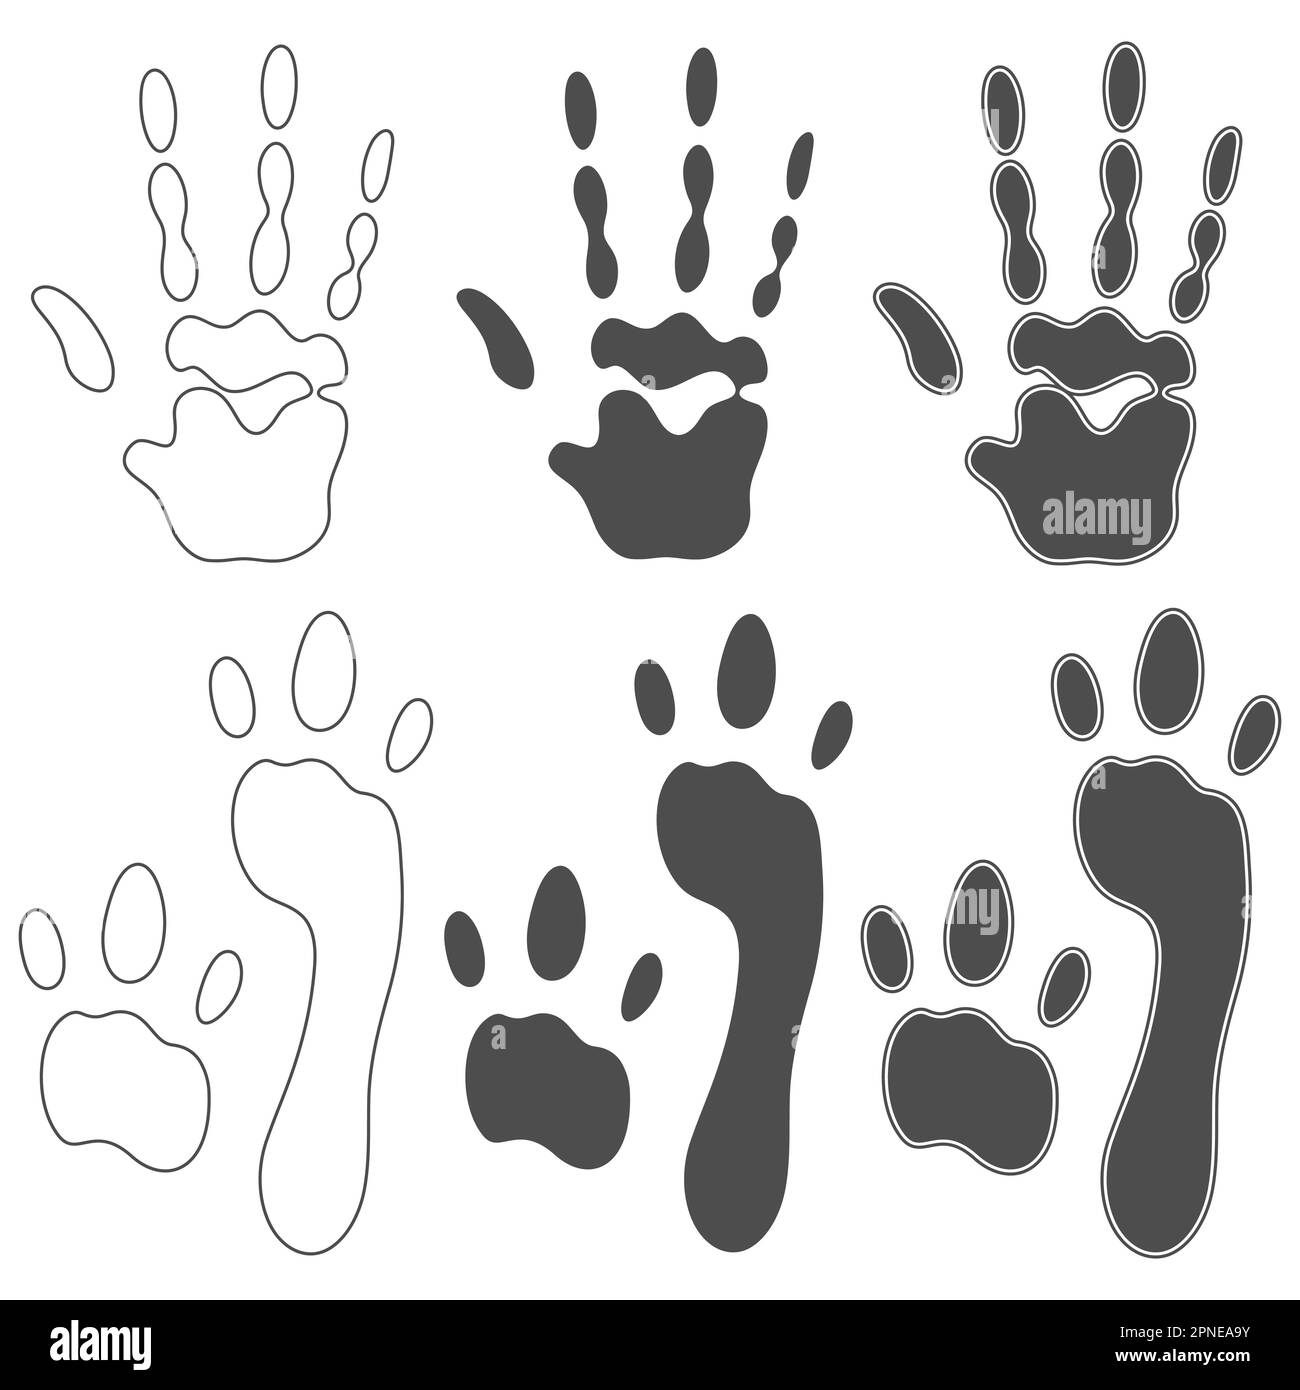 Set of black and white illustration with print of alien hand and feet. Isolated vector objects on white background. Stock Vector